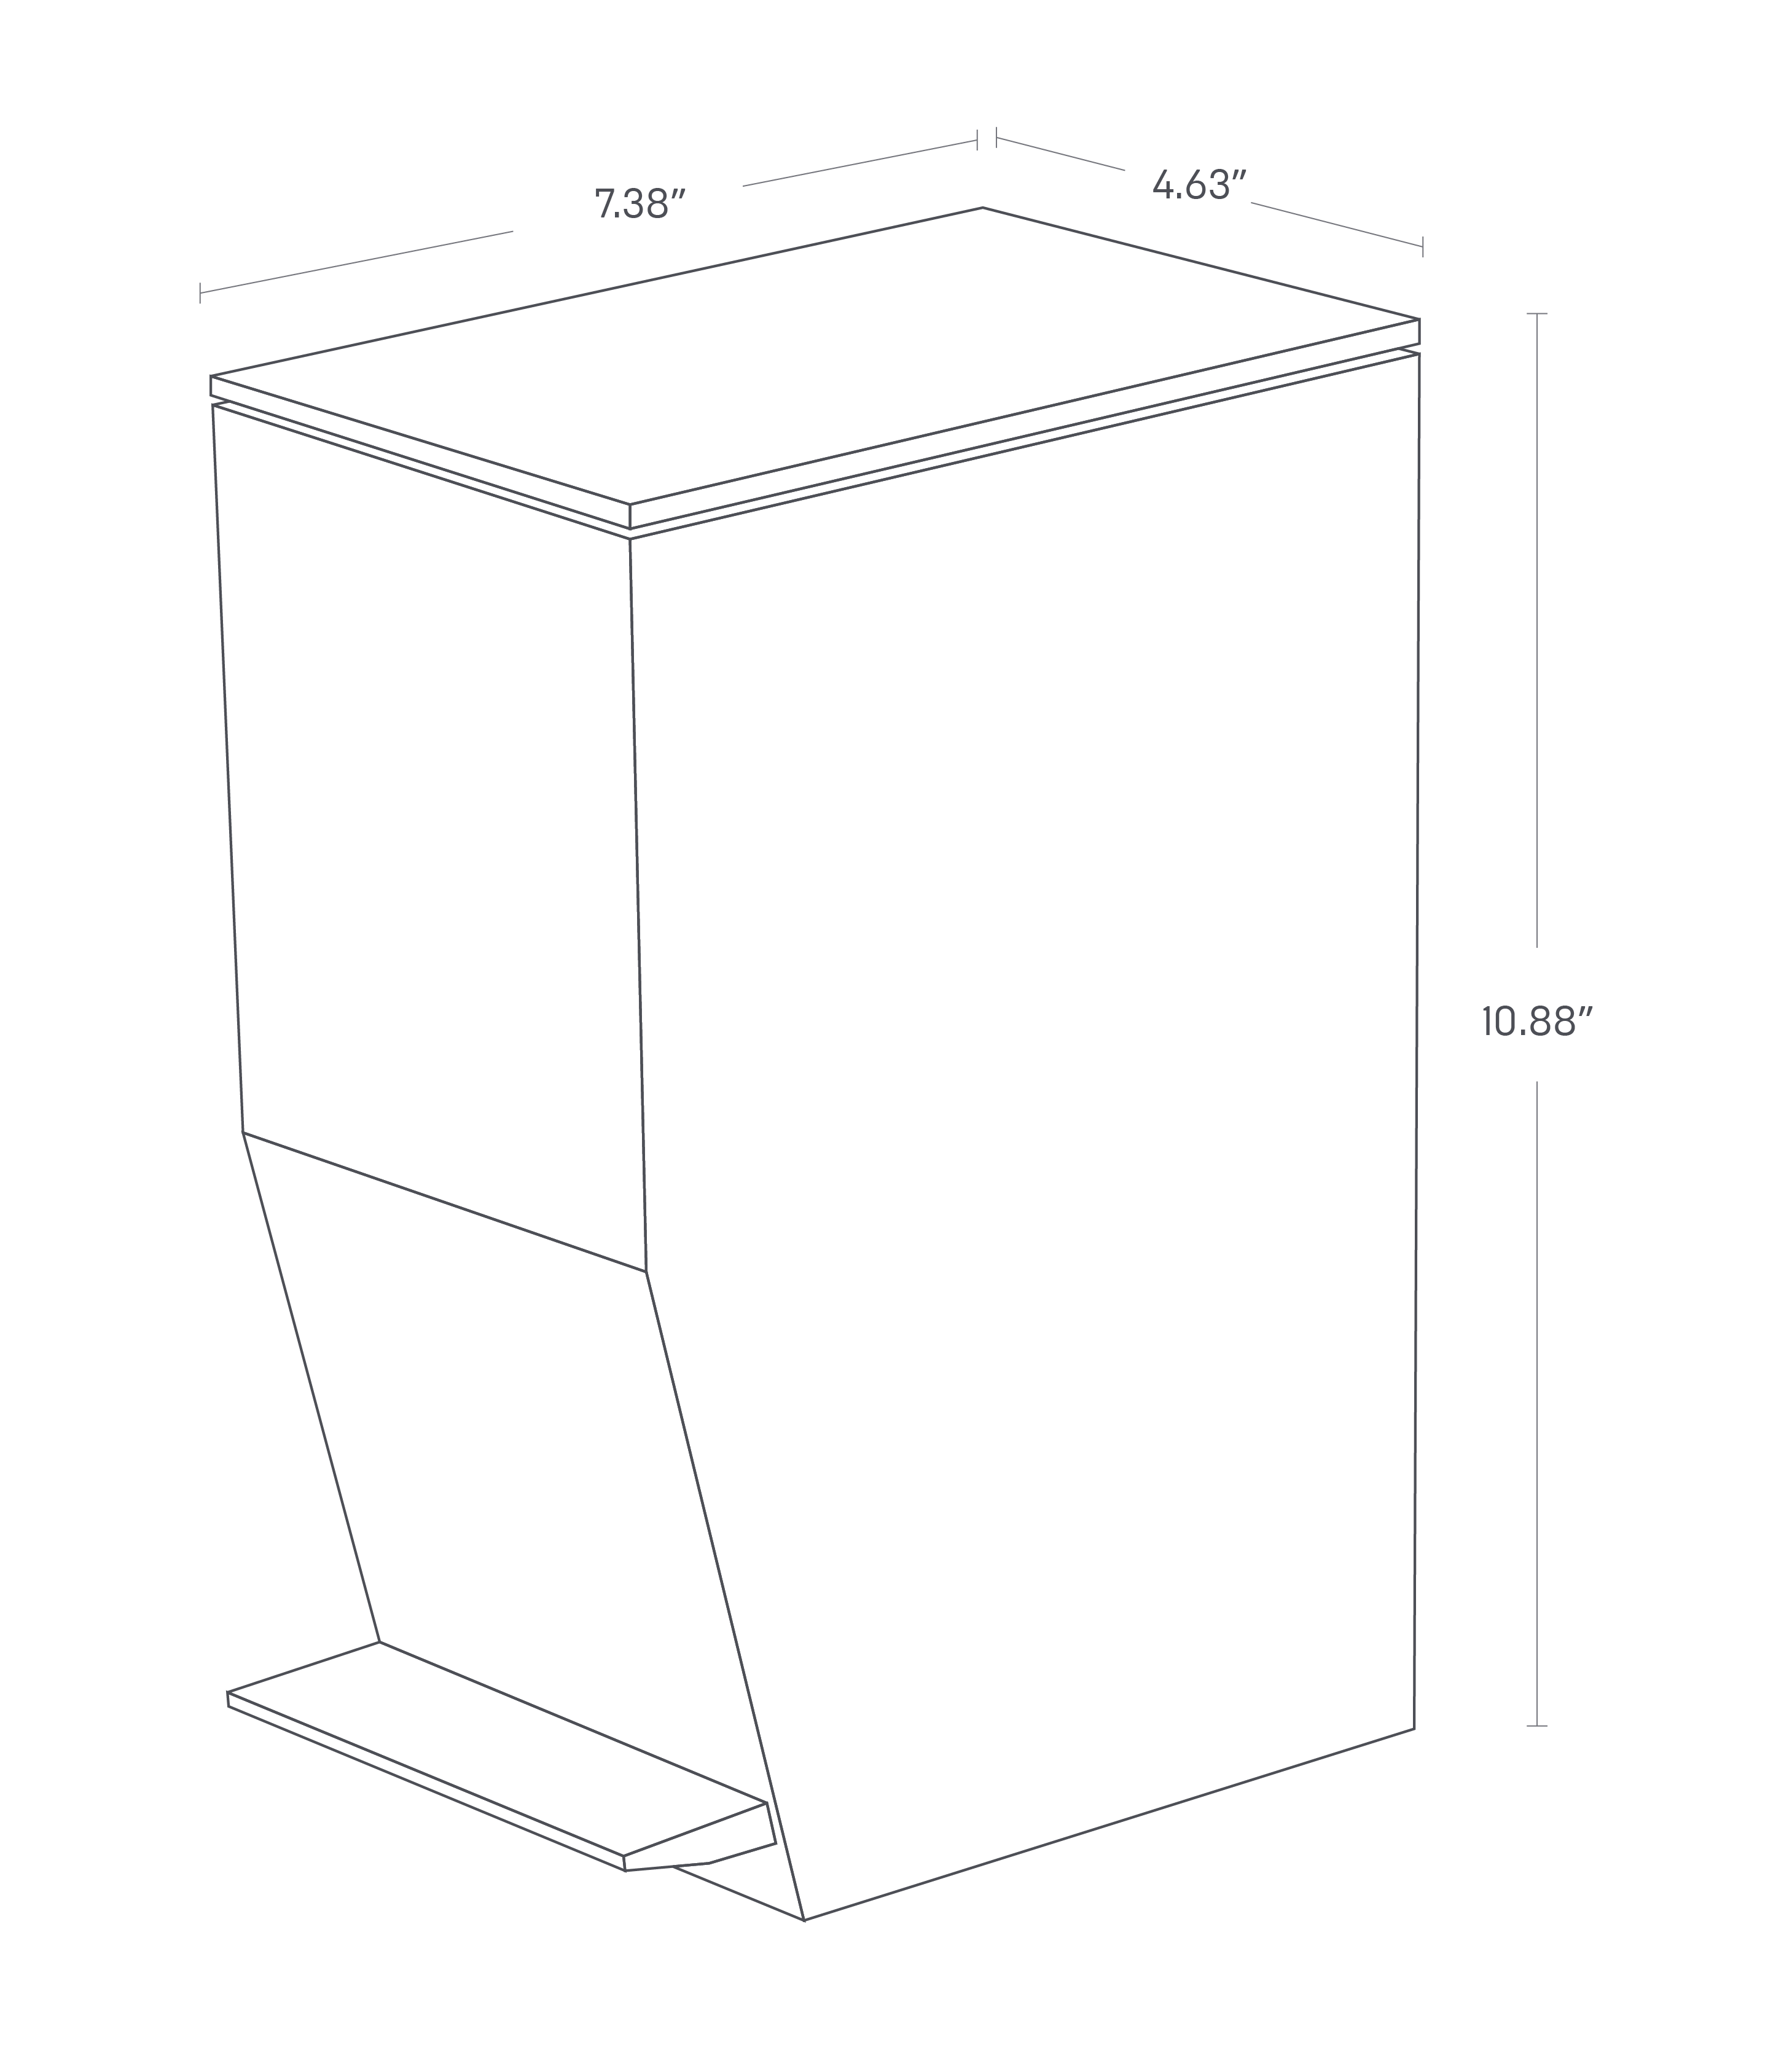 Dimension image for Step Trash Can on a white background including dimensions  L 7.48 x W 4.72 x H 10.83 inches